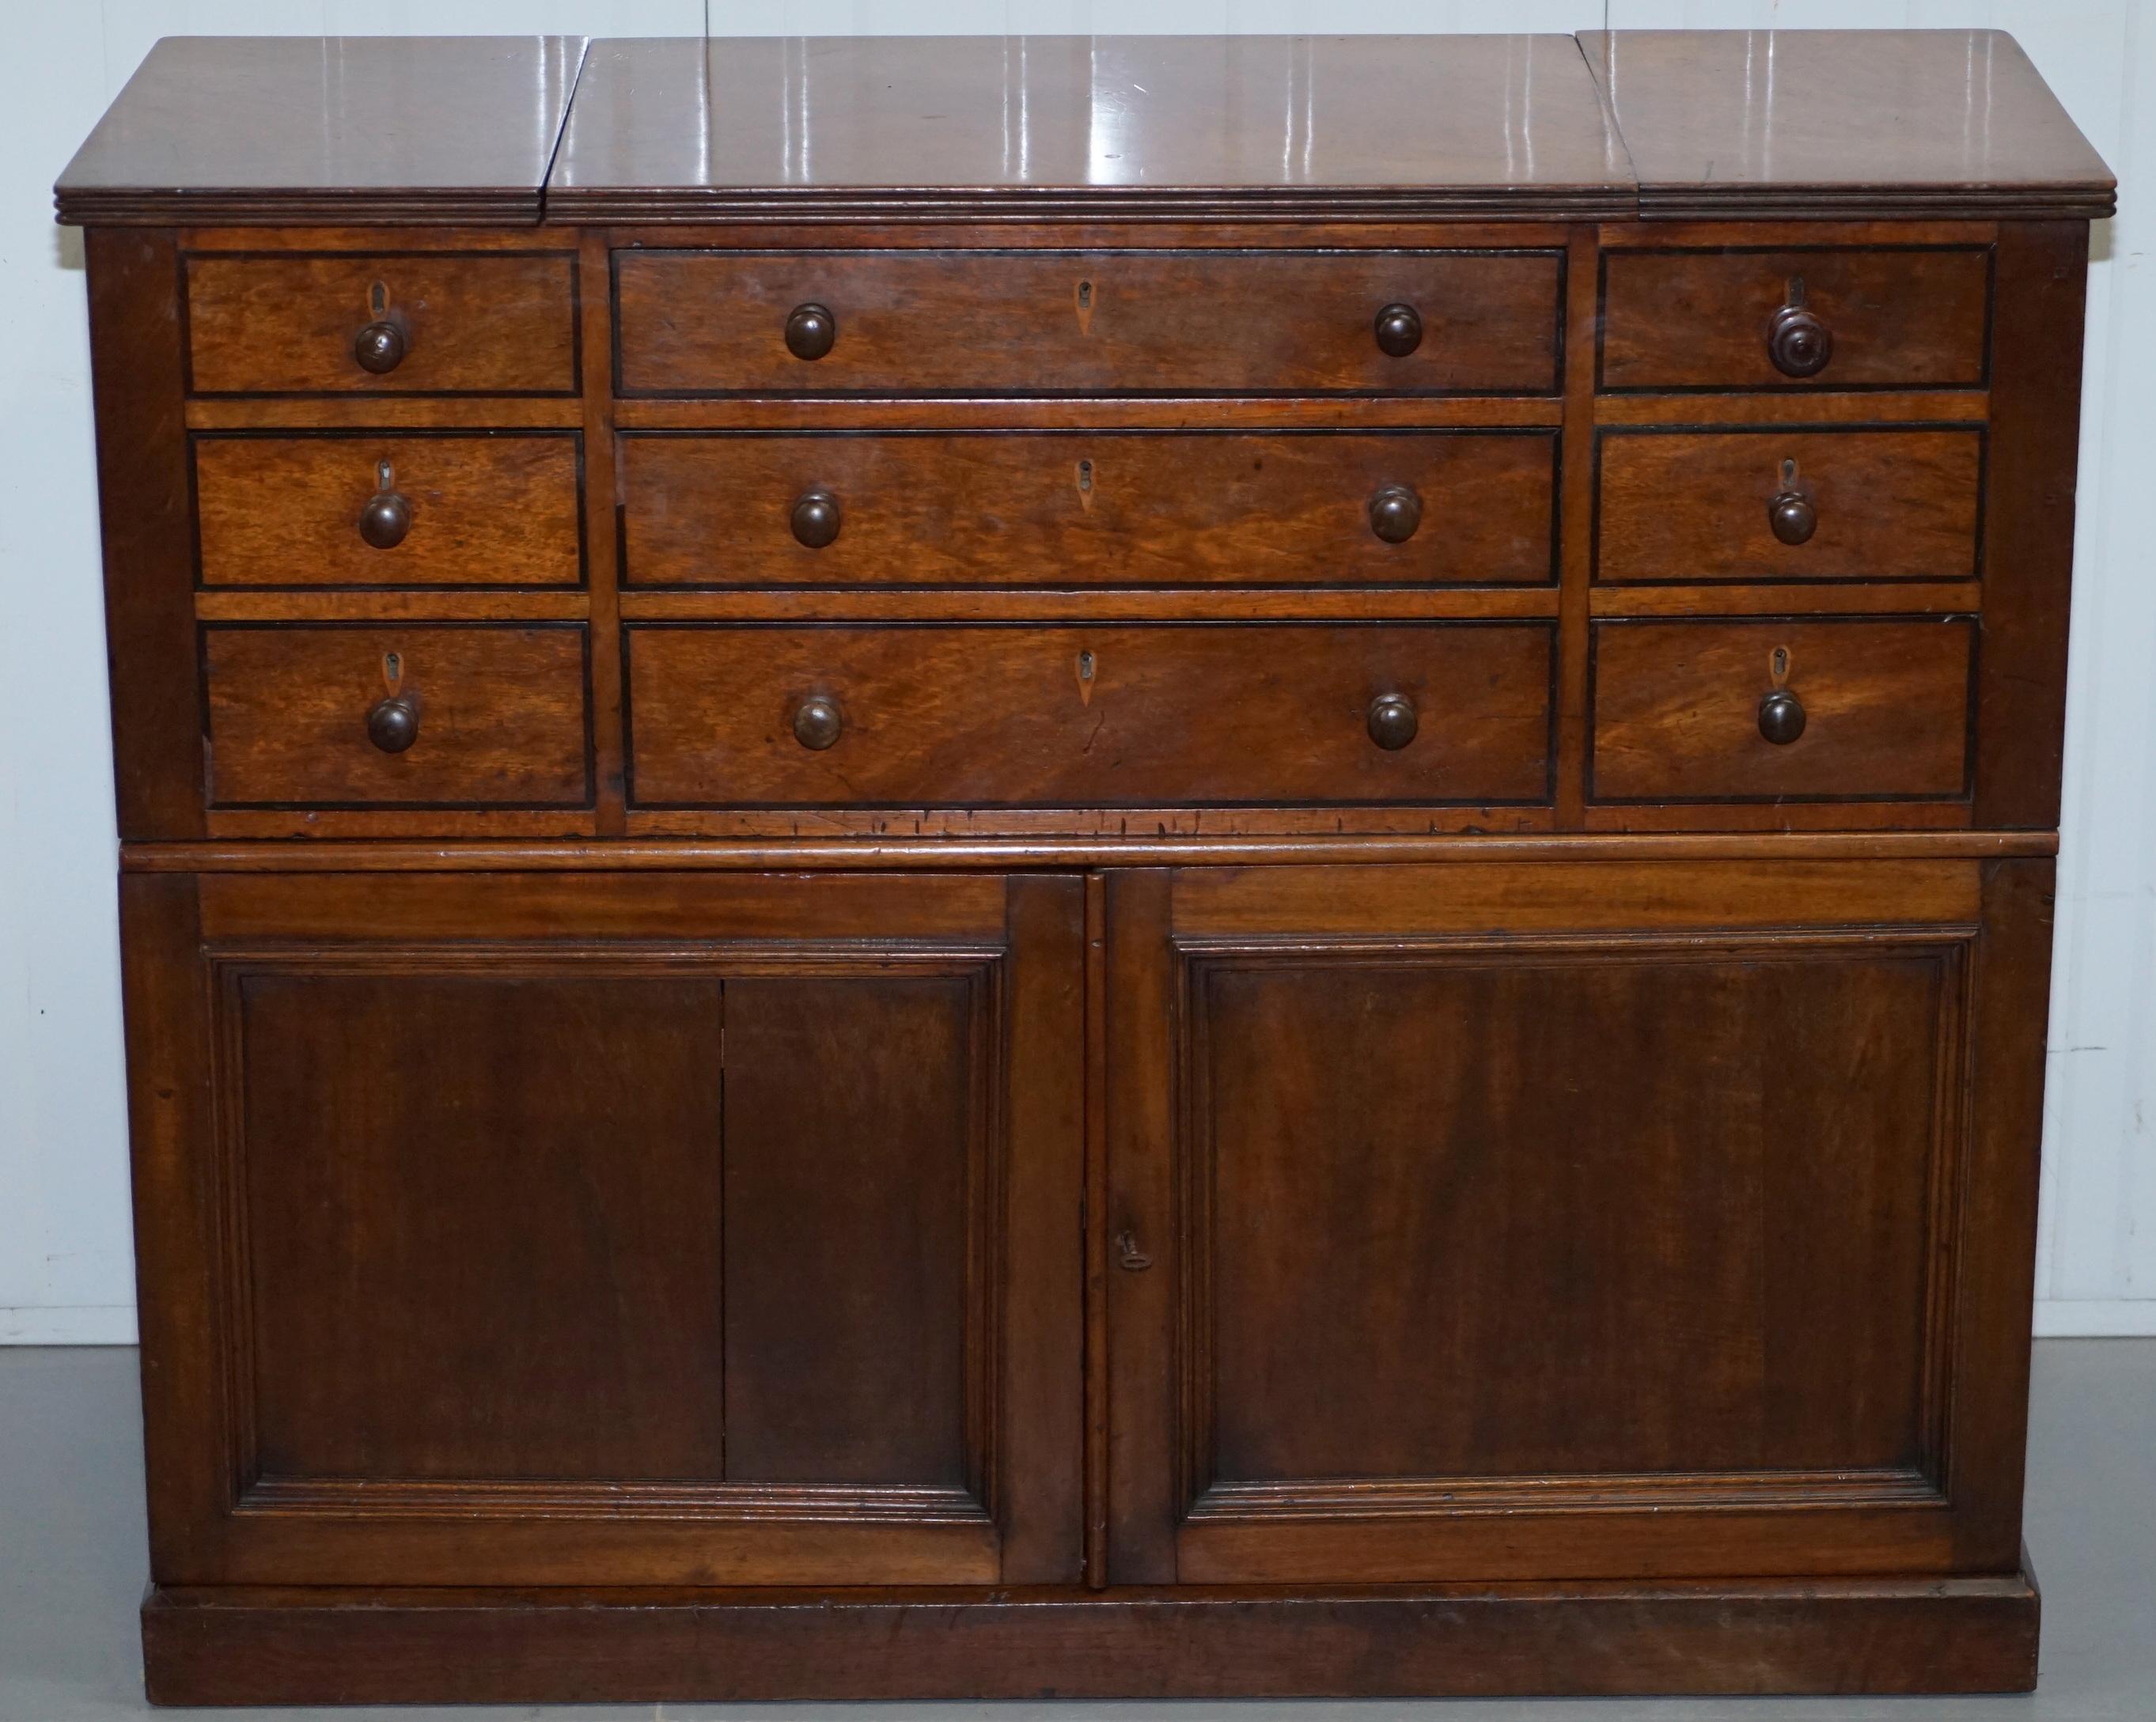 We are delighted to offer for sale this very rare custom made Victorian Fruitwood collectors sideboard with drawers and open flat top

Please note the delivery fee listed is just a guide, it covers within the M25 only

I have never seen another